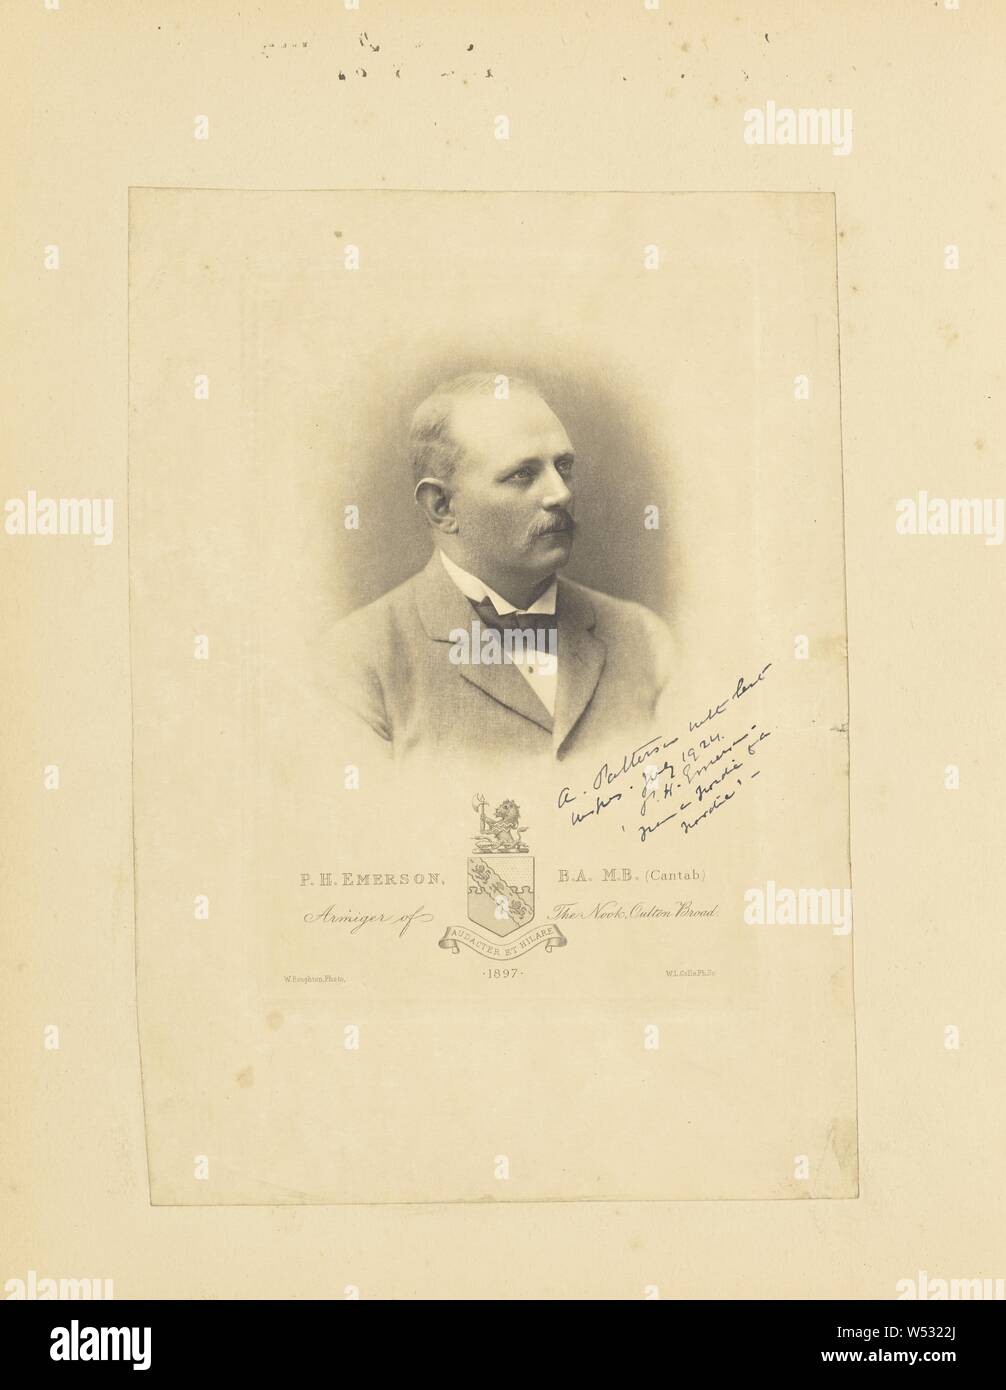 P.H. Emerson, B.A., M.B. (Cantab). Amiger of the Nook, Oulton Broad, W. Boughton (British, active about 1890 - about 1910), London, England, 1890, Photogravure, 15.7 × 10.8 cm (6 3/16 × 4 1/4 in Stock Photo